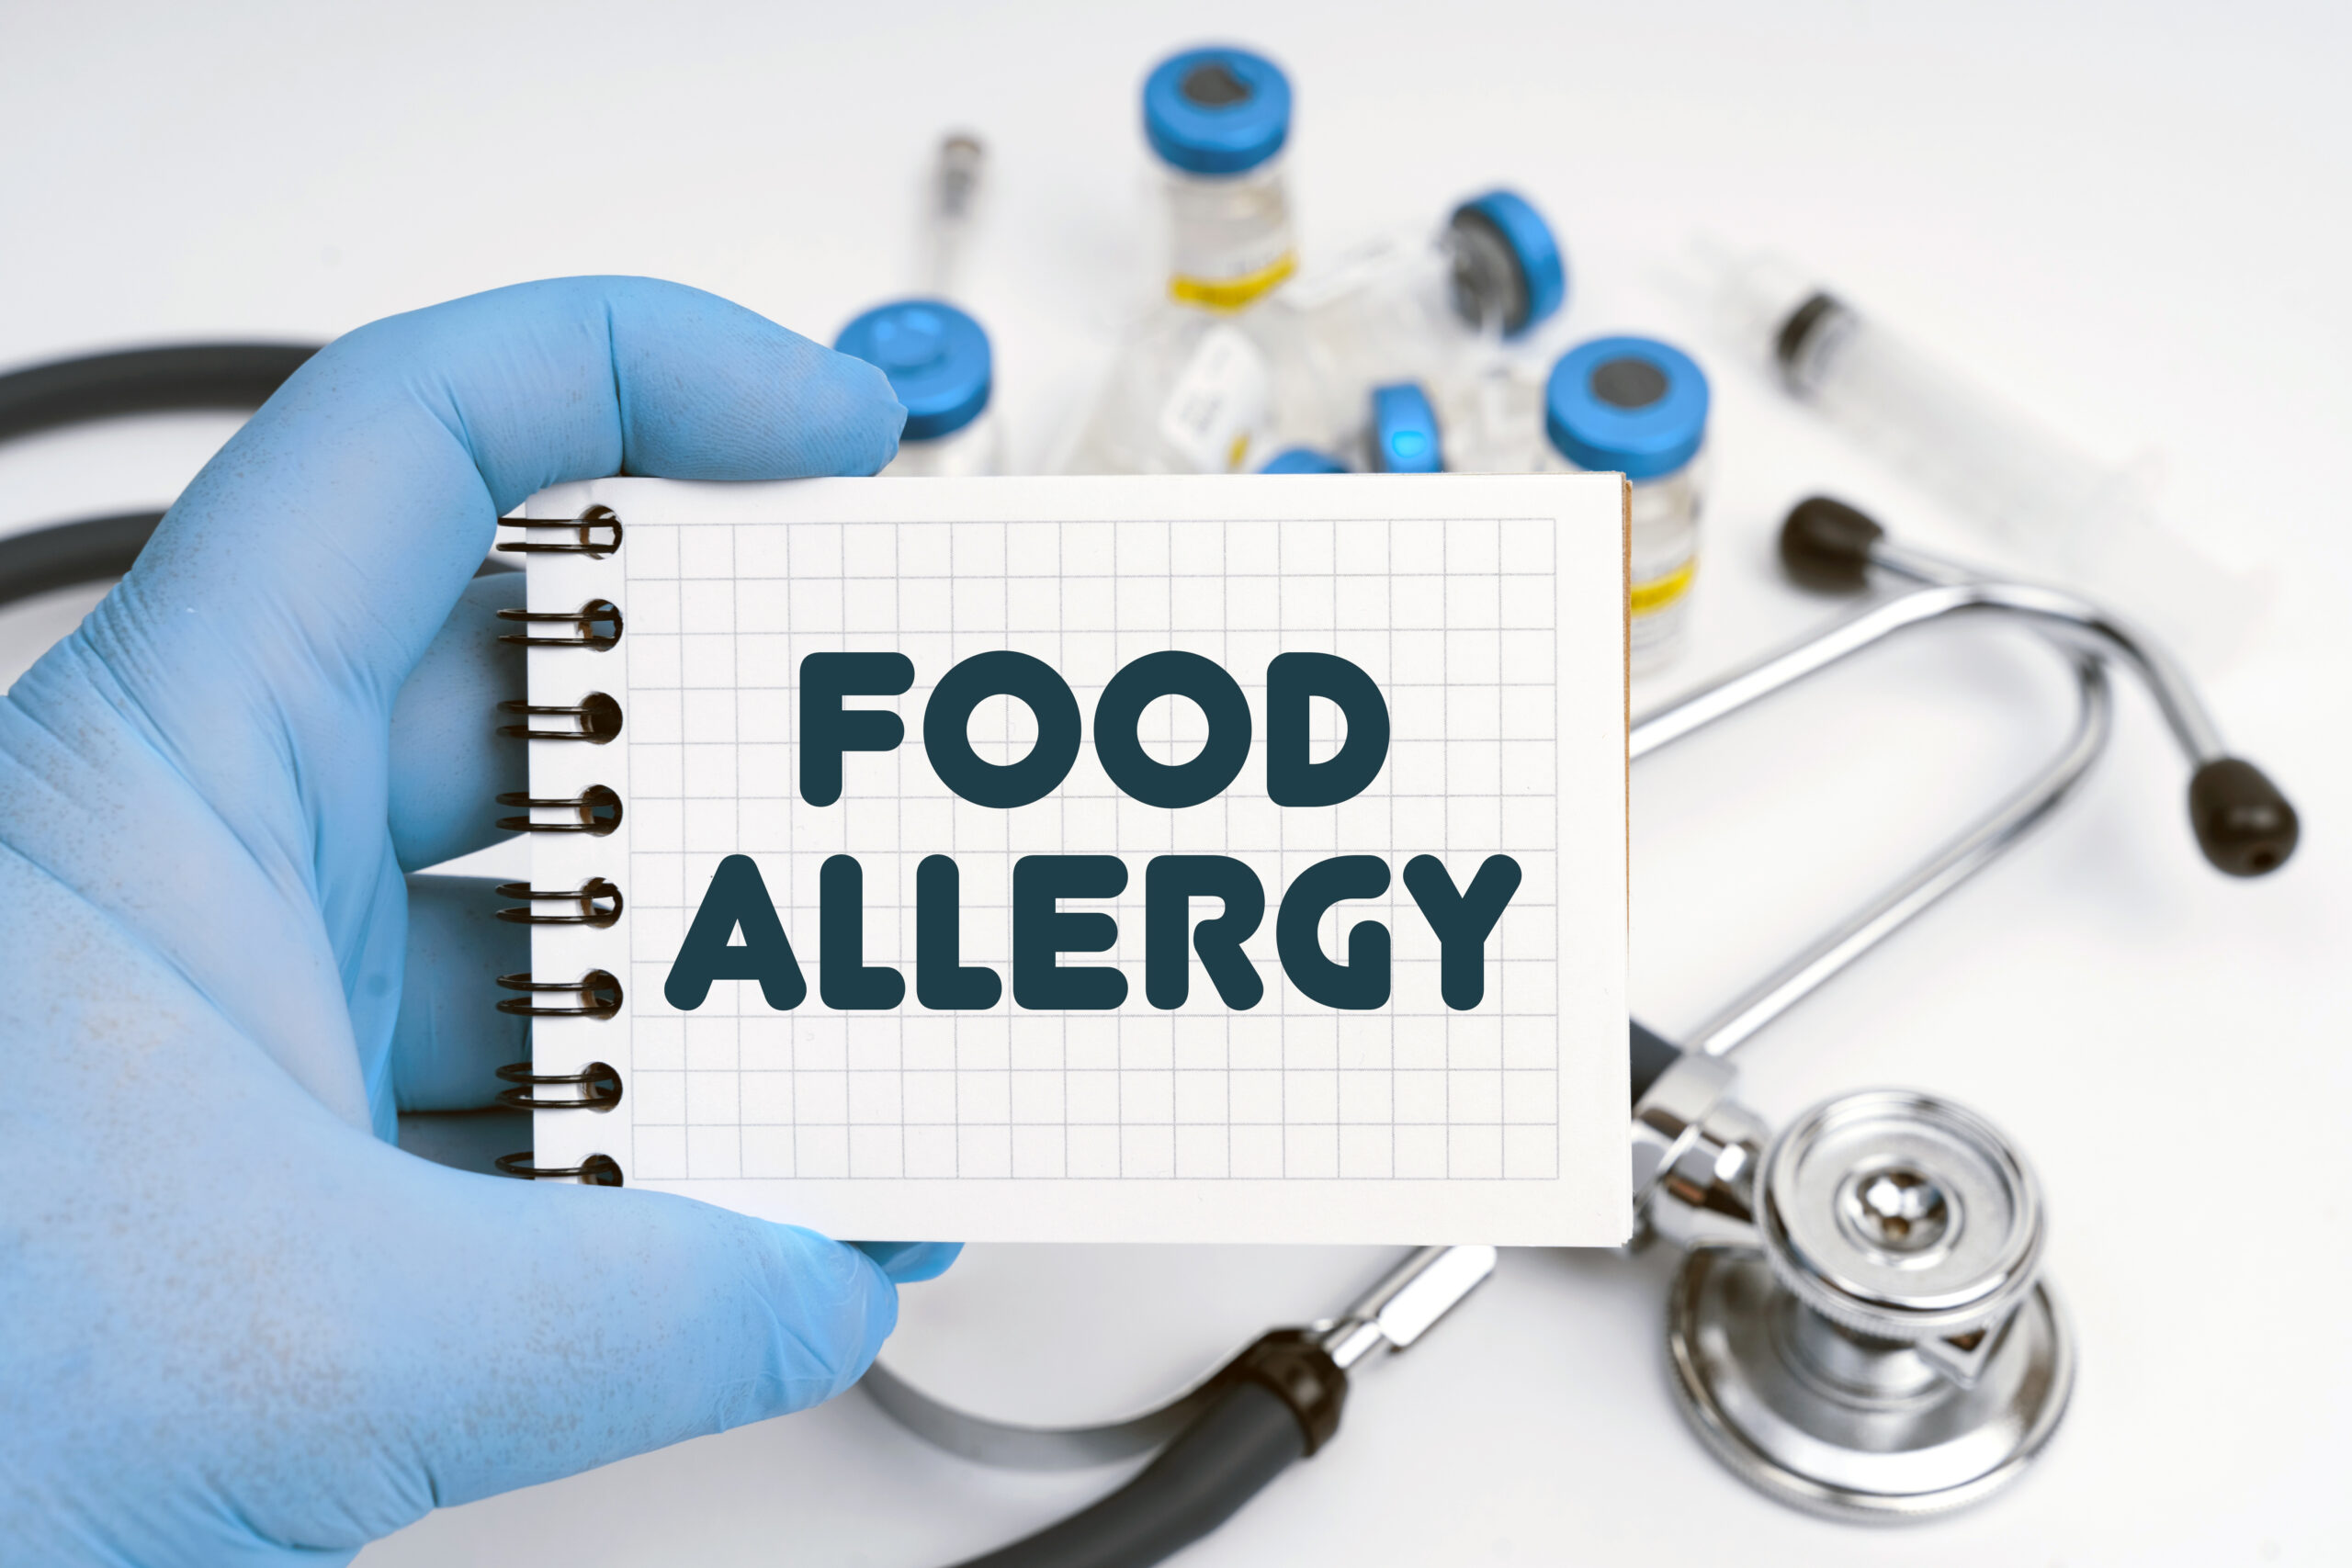 There is a stethoscope on the table, the doctor holds a notebook in his hand with the inscription – food allergy